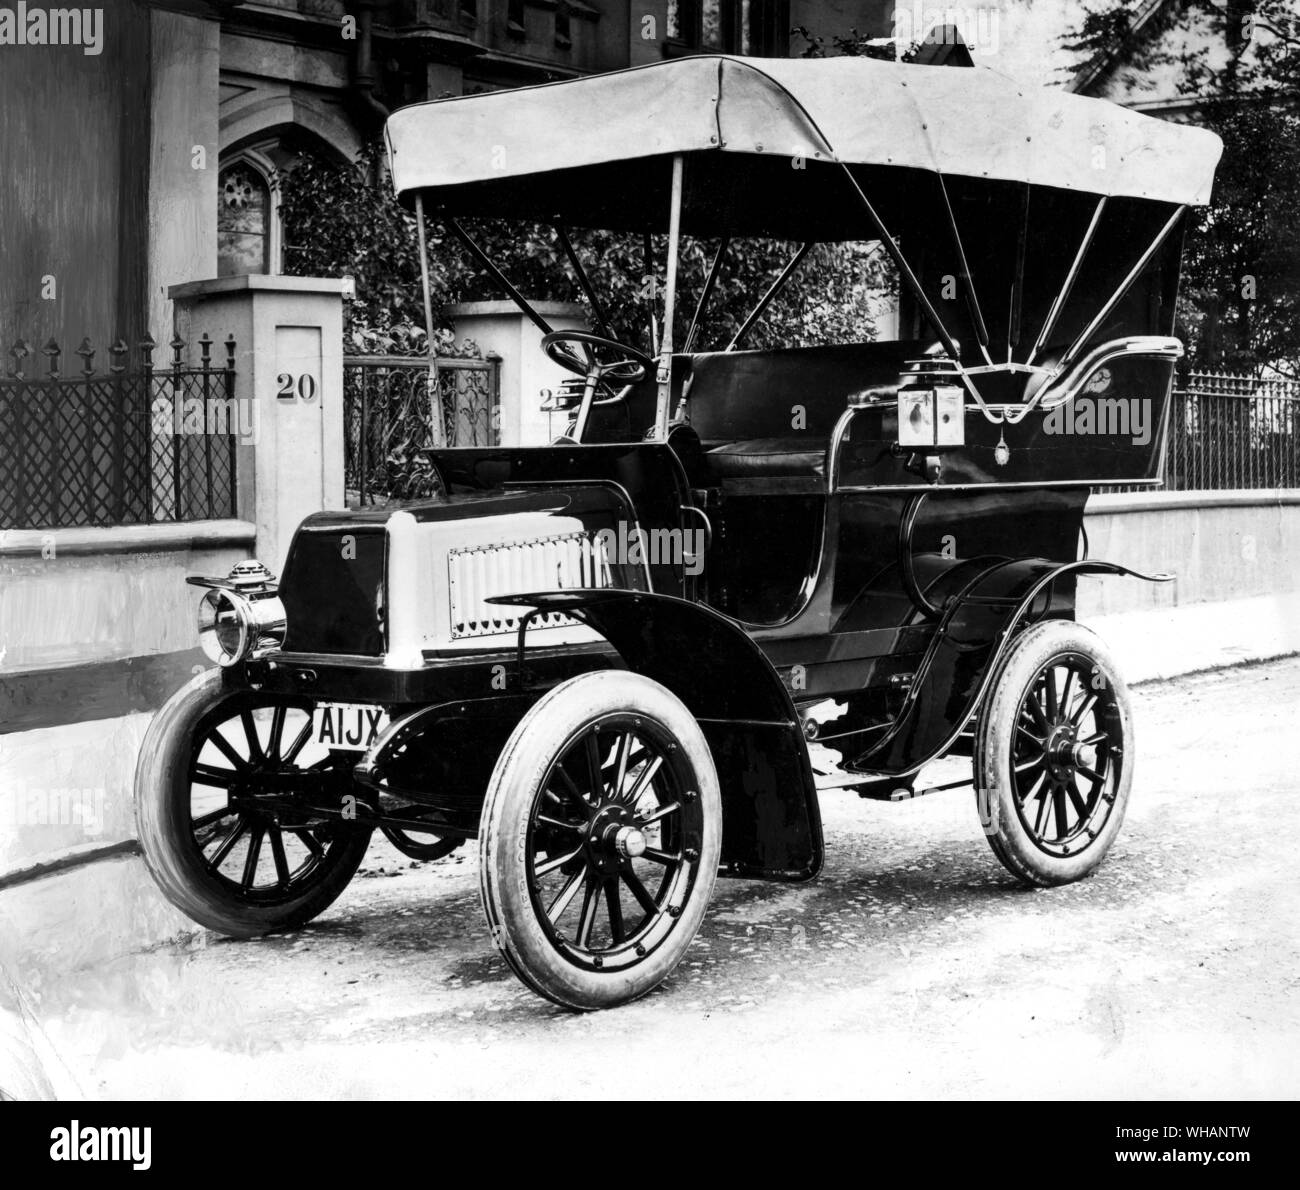 1905 Oppermann electric tonneau. Built for the King of Siam. Autocar. . Oppermann. Carl Oppermann of London (England) produced electric cars under his own name from 1898 to 1902, and by the Carl Oppermann Electric Carriage Co. Ltd from 1902 to 1907. The company made its own batteries to power a variety of vehicle types. Most vehicles had open body styles, and produced a number of electric taxicabs, particularly in the last few years of operation. An Oppermann electric was sold to the King of Siam in 1905.. . Stock Photo